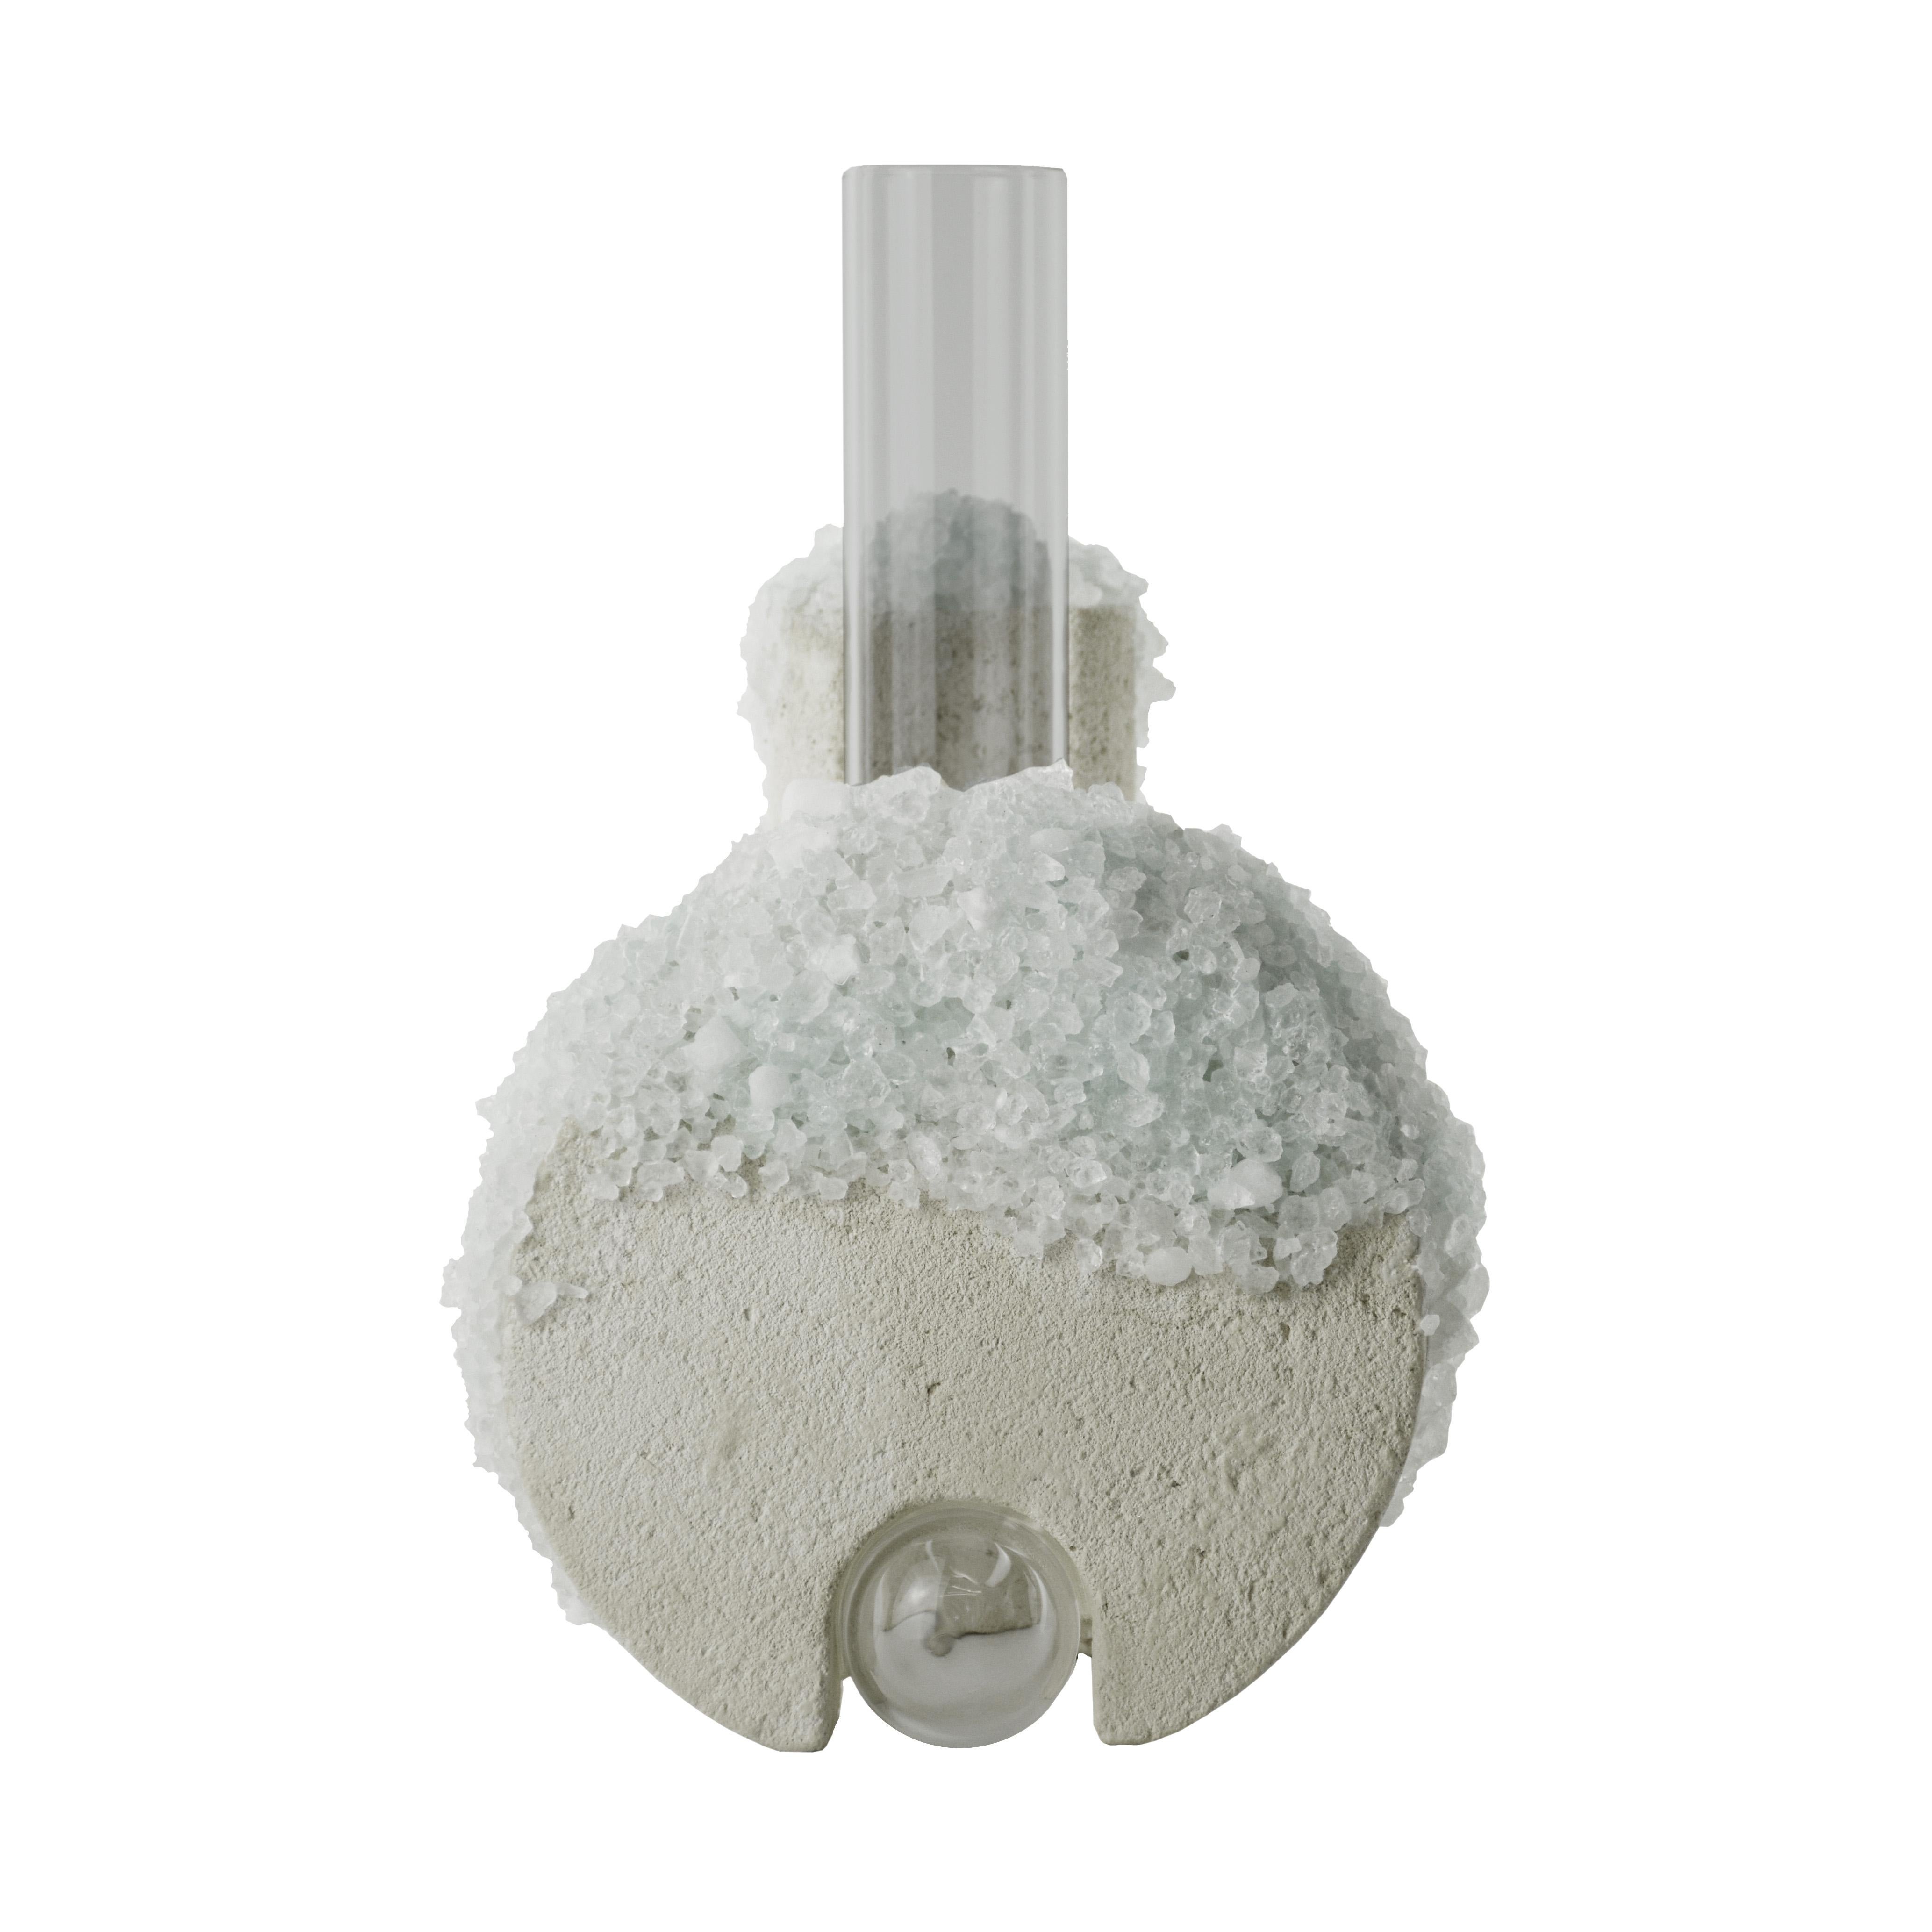 Winter 1 Cochlea della Metamorfosi 2 Seasons Edition Vase by Coki Barbieri
Dimensions: W 14 x D 15 x H 24 cm.
Materials: Handcrafted stone made with Matera stone fragments, sedimentary rocks of the Italian Apennines and pure water, Italian rock